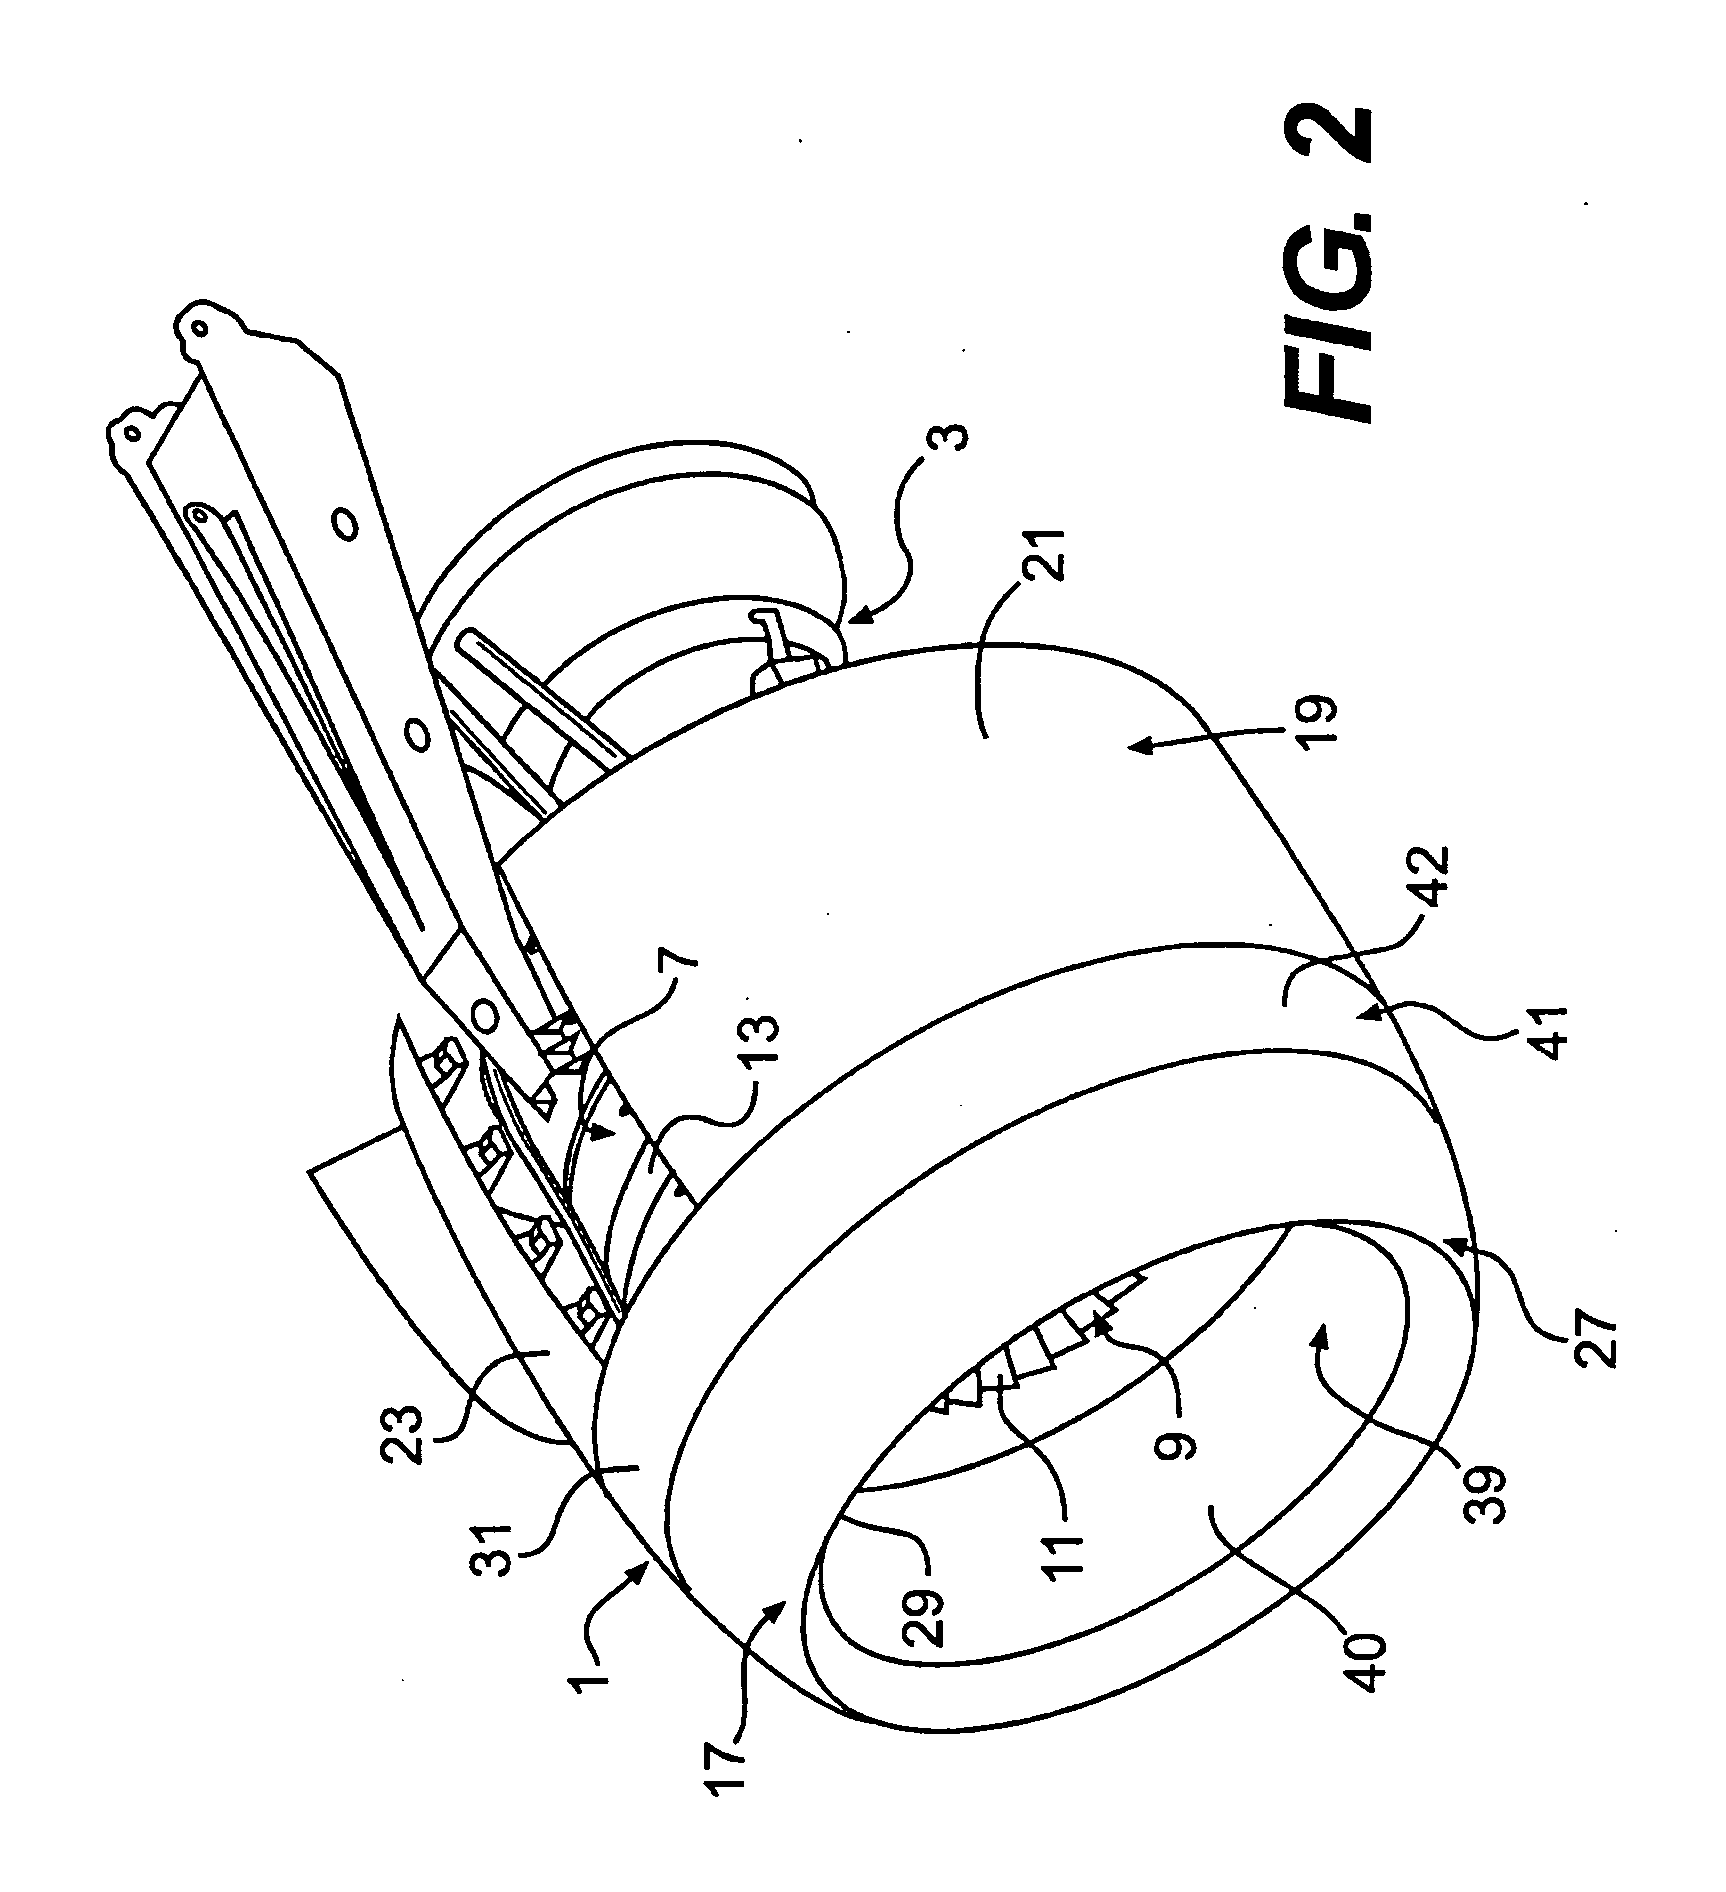 Aircraft engine inlet having zone of deformation